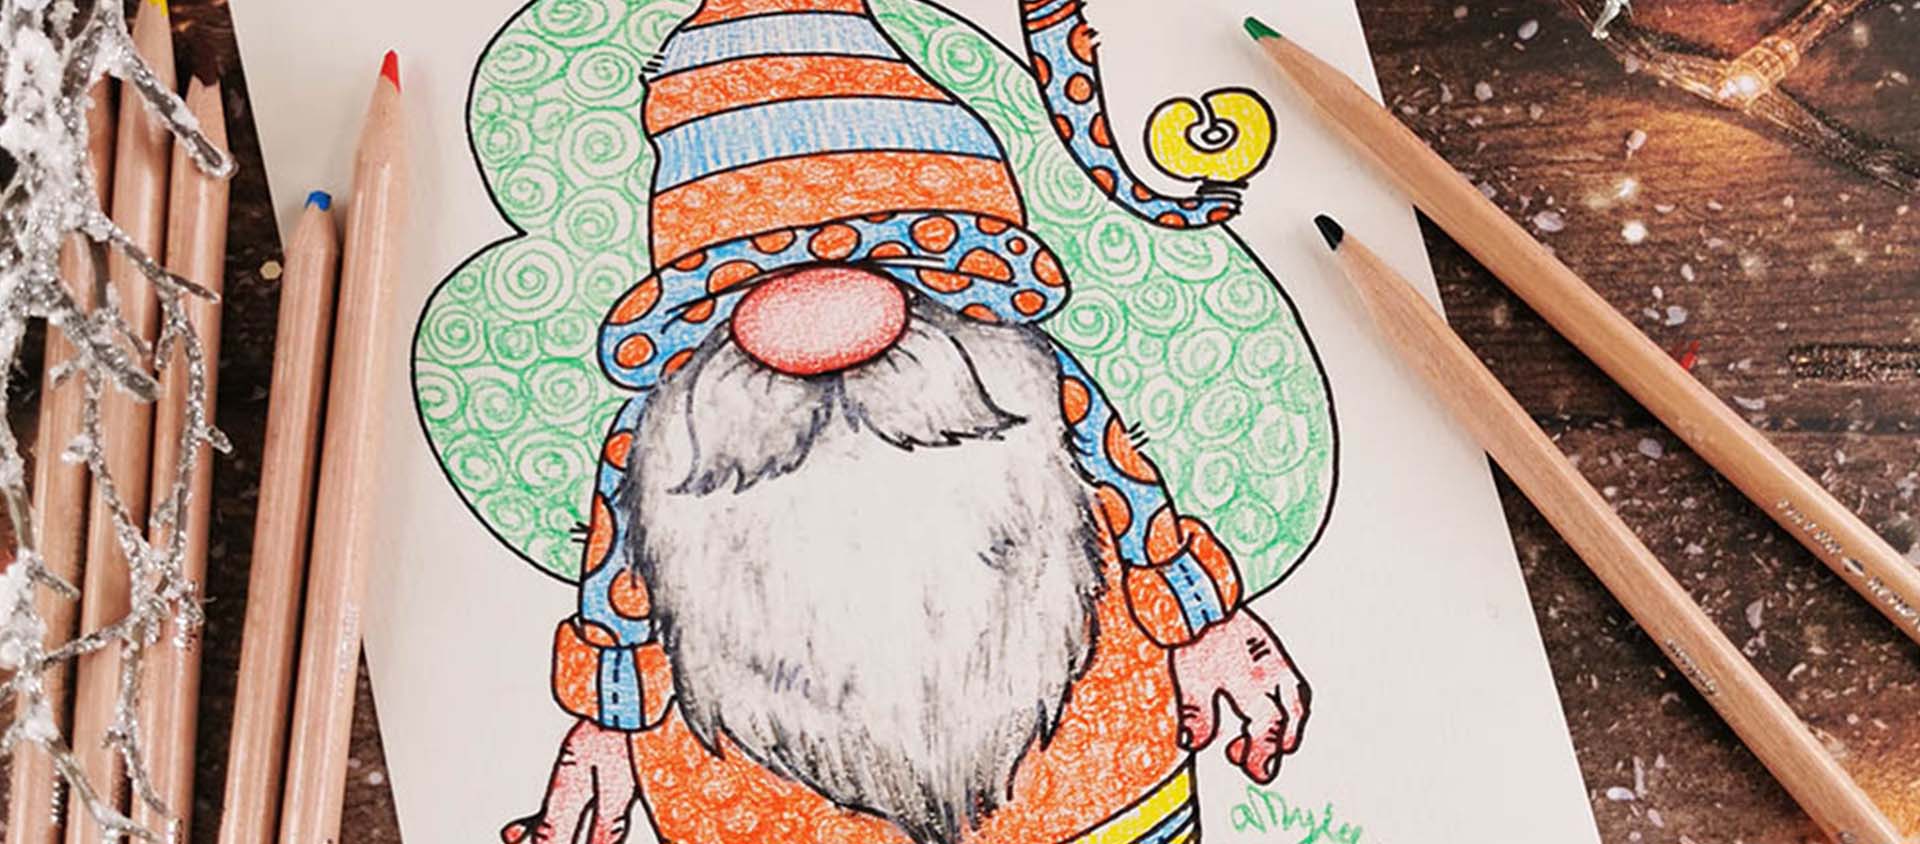 Learn how to draw Gonks with Simply Colouring Pencils by using this step-by-step guide created by Daler-Rowney artist Amylee Paris, and is easy for beginners to follow and explore using colouring pencils!